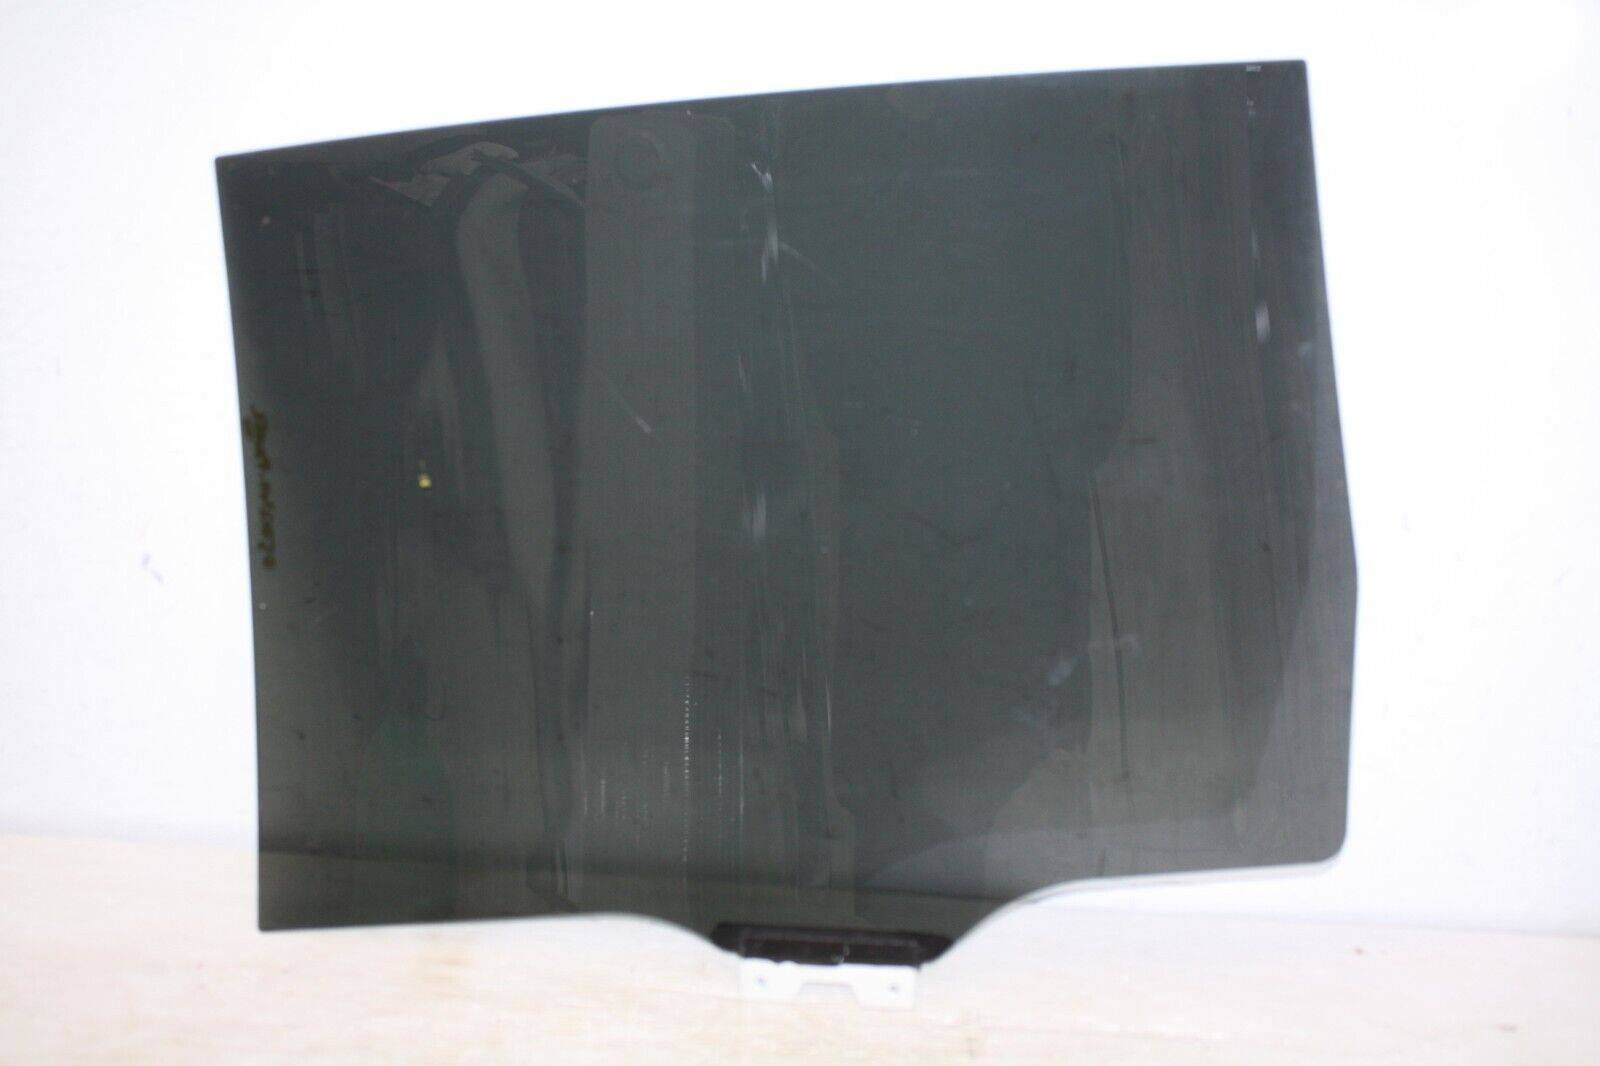 Ford-S-Max-Rear-Right-Side-Door-Glass-2015-TO-2019-EM2B-R25712-A-genuine-176173445877-9